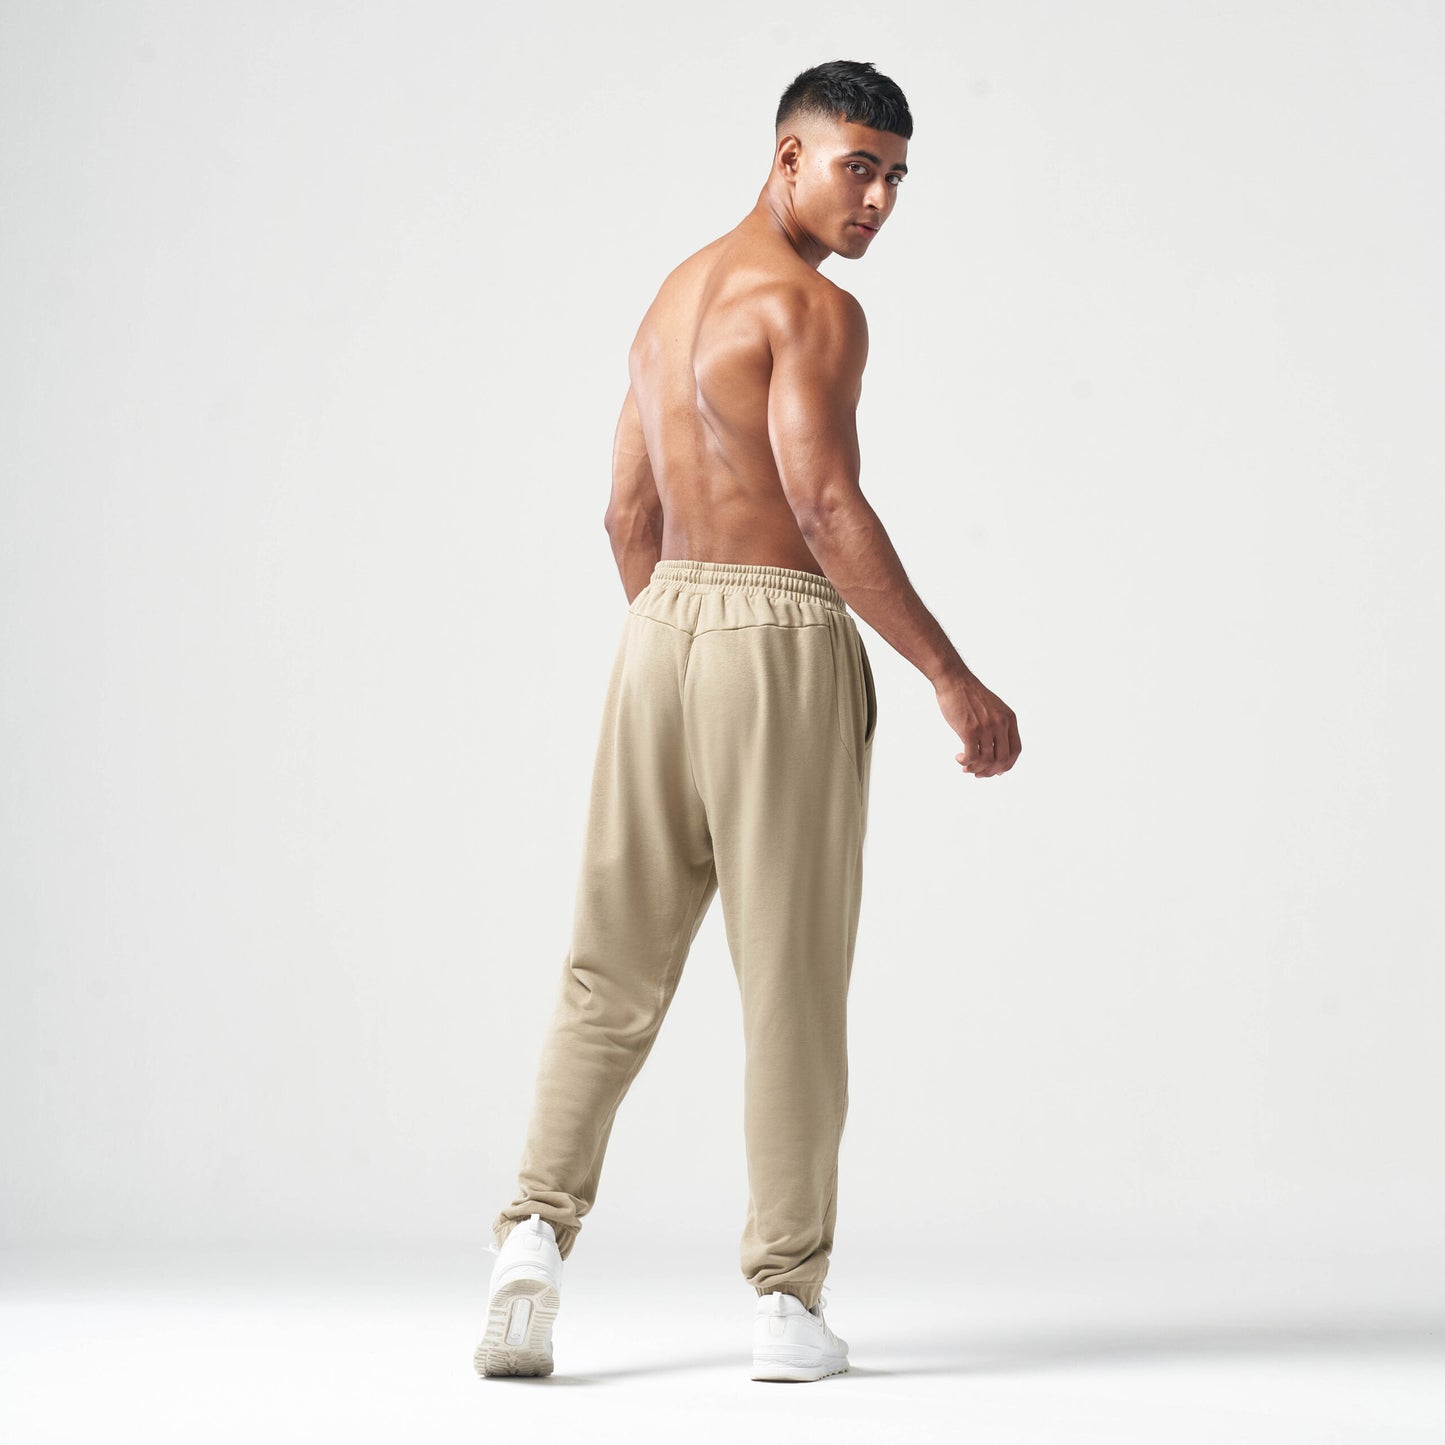 squatwolf-gym-wear-essential-jogger-pant-sand-workout-pant-for-men